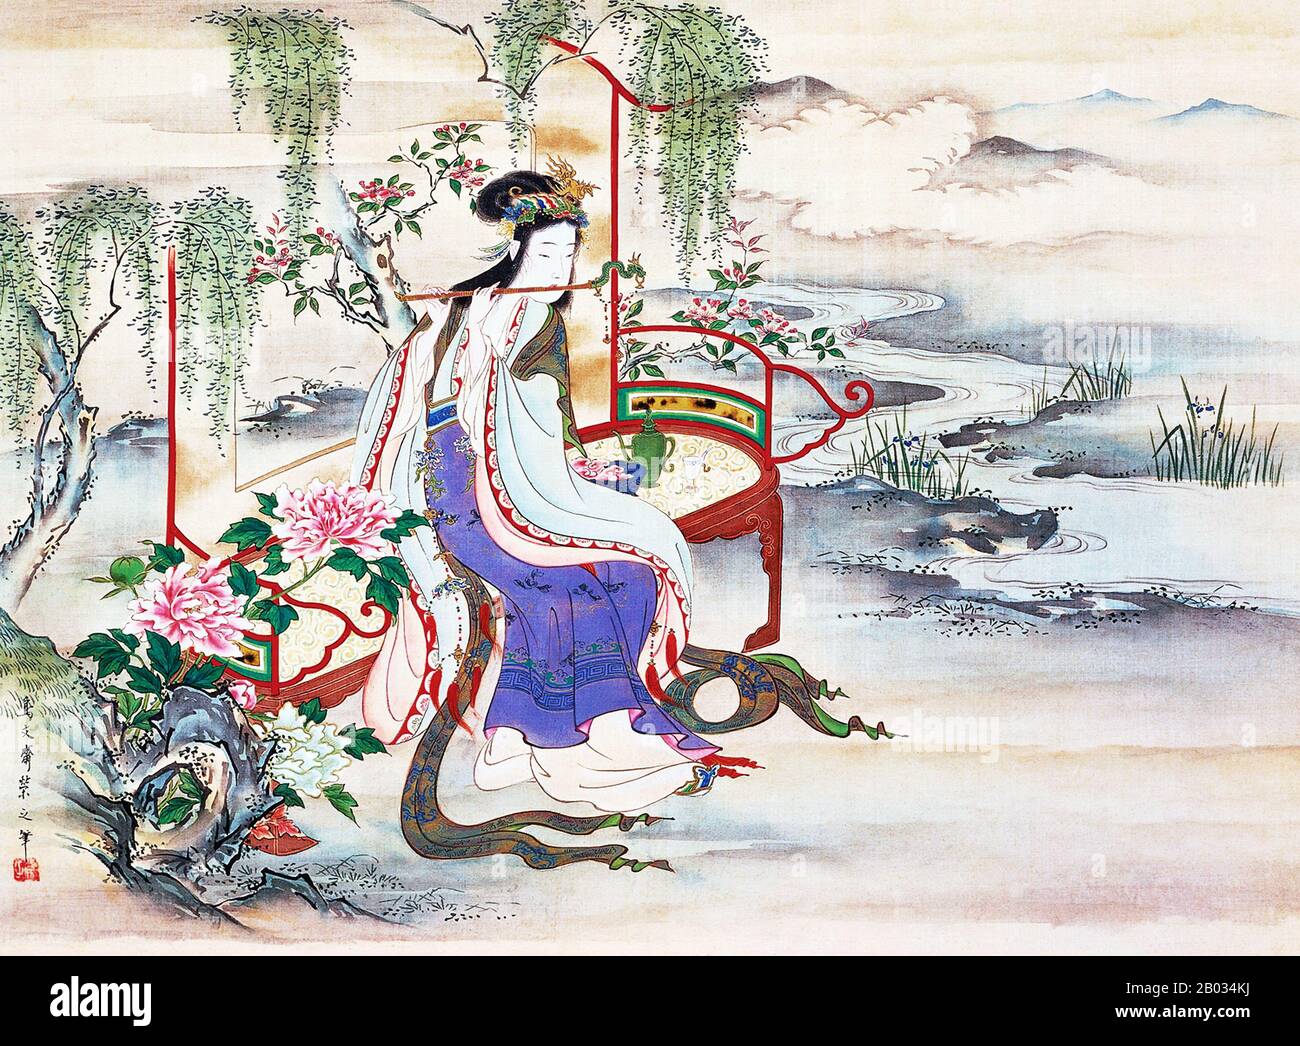 Consort Yang Yuhuan (1 June 719 — 15 July 756 CE), often known as Yang Guifei (Guifei being the highest rank for imperial consorts during her time), known briefly by the Taoist nun name Taizhen, is famous as one of the Four Beauties of ancient China.  She was the beloved consort of Emperor Xuanzong of Tang during his later years. During the Anshi Rebellion, as Emperor Xuanzong was fleeing from the capital Chang'an to Chengdu, she was killed because his guards blamed the rebellion on her powerful cousin Yang Guozhong and the rest of her family.  The story of Yang Guifei and the poem also became Stock Photo